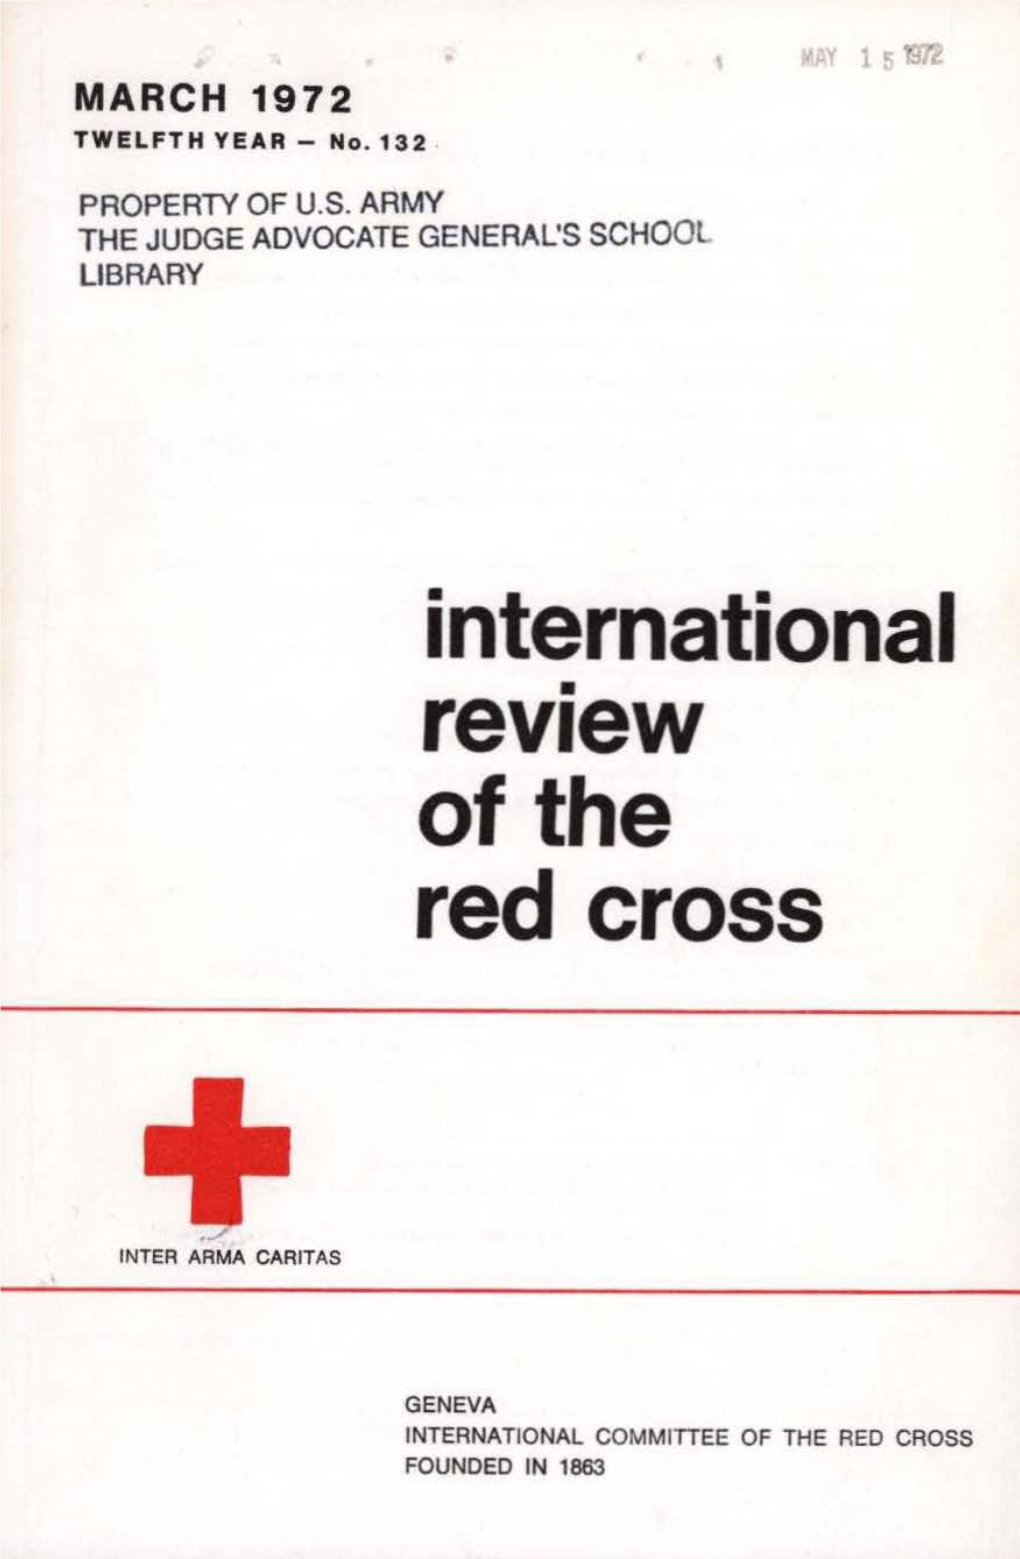 International Review of the Red Cross, March 1972, Twelfth Year